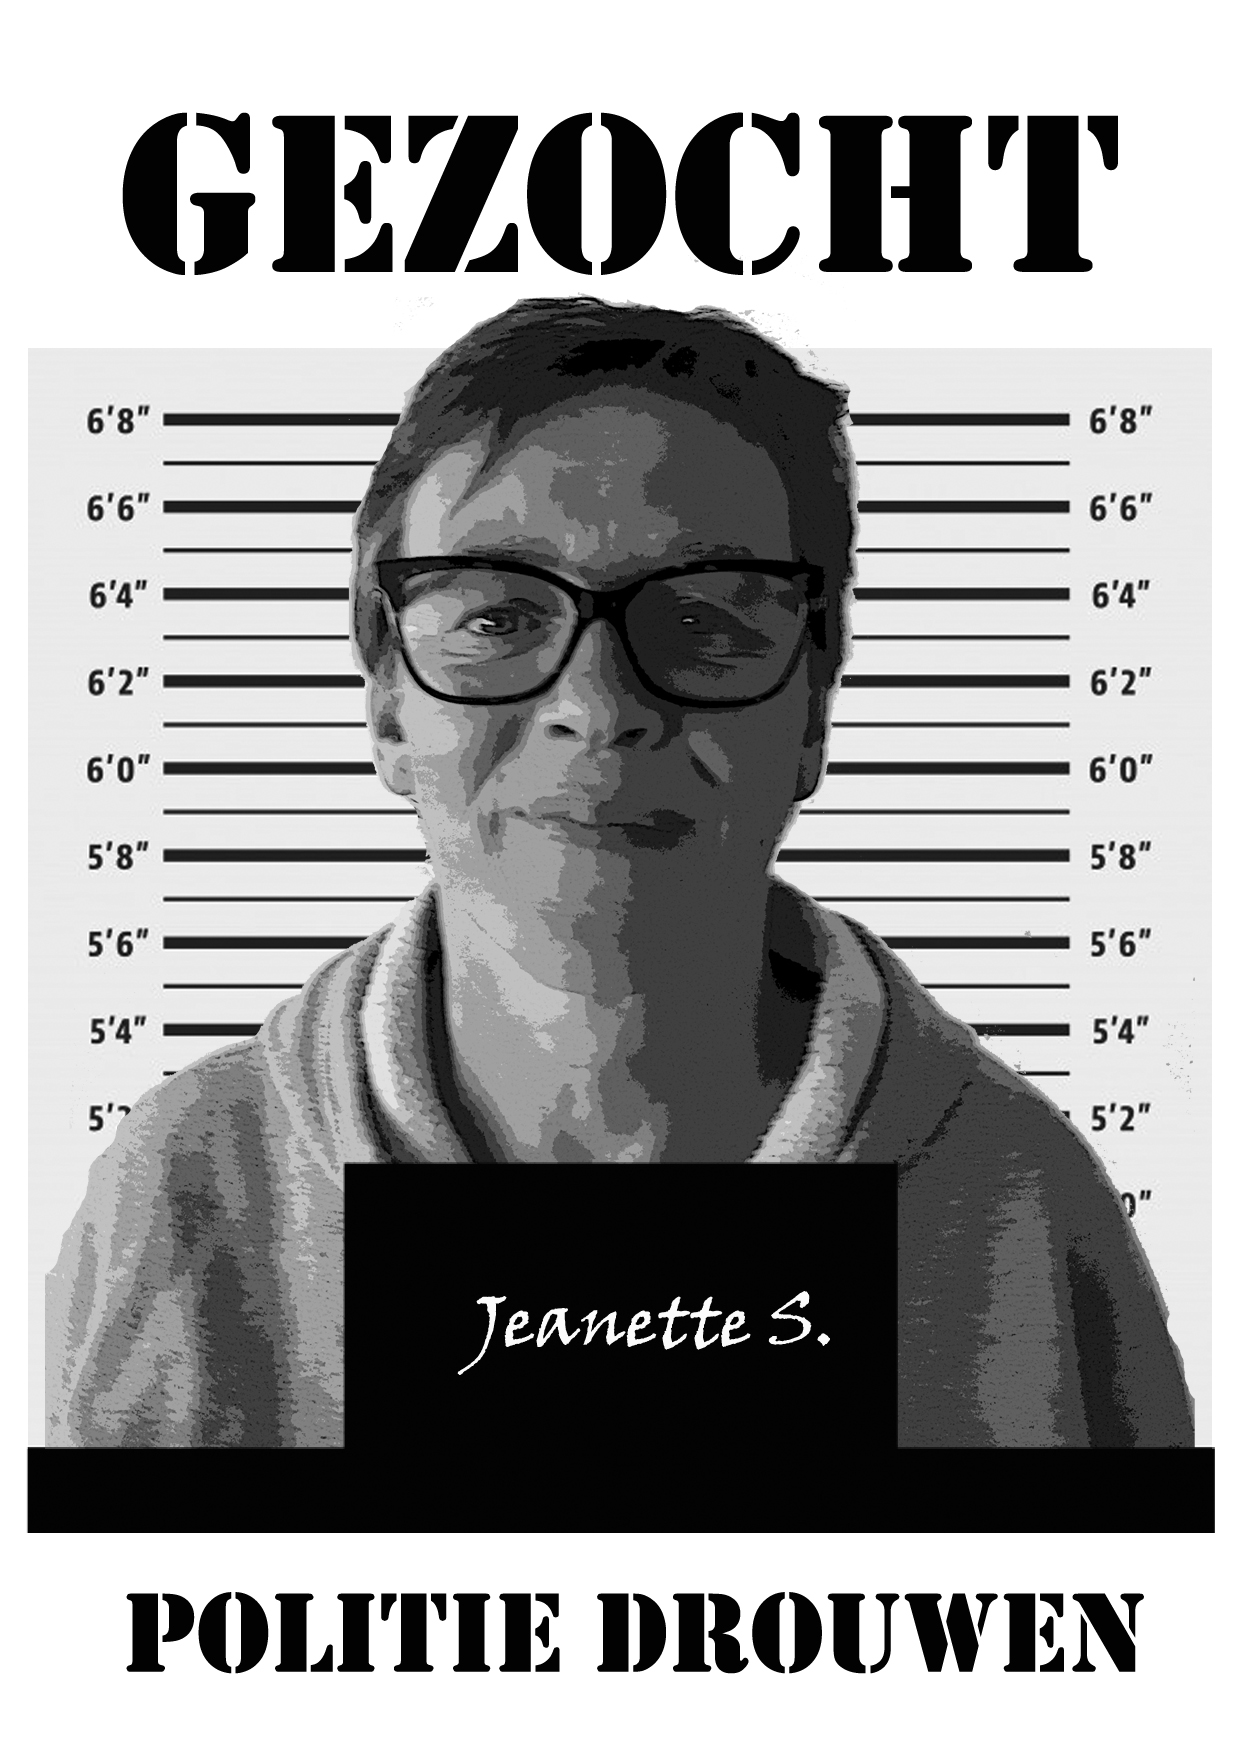 Jeanette wanted